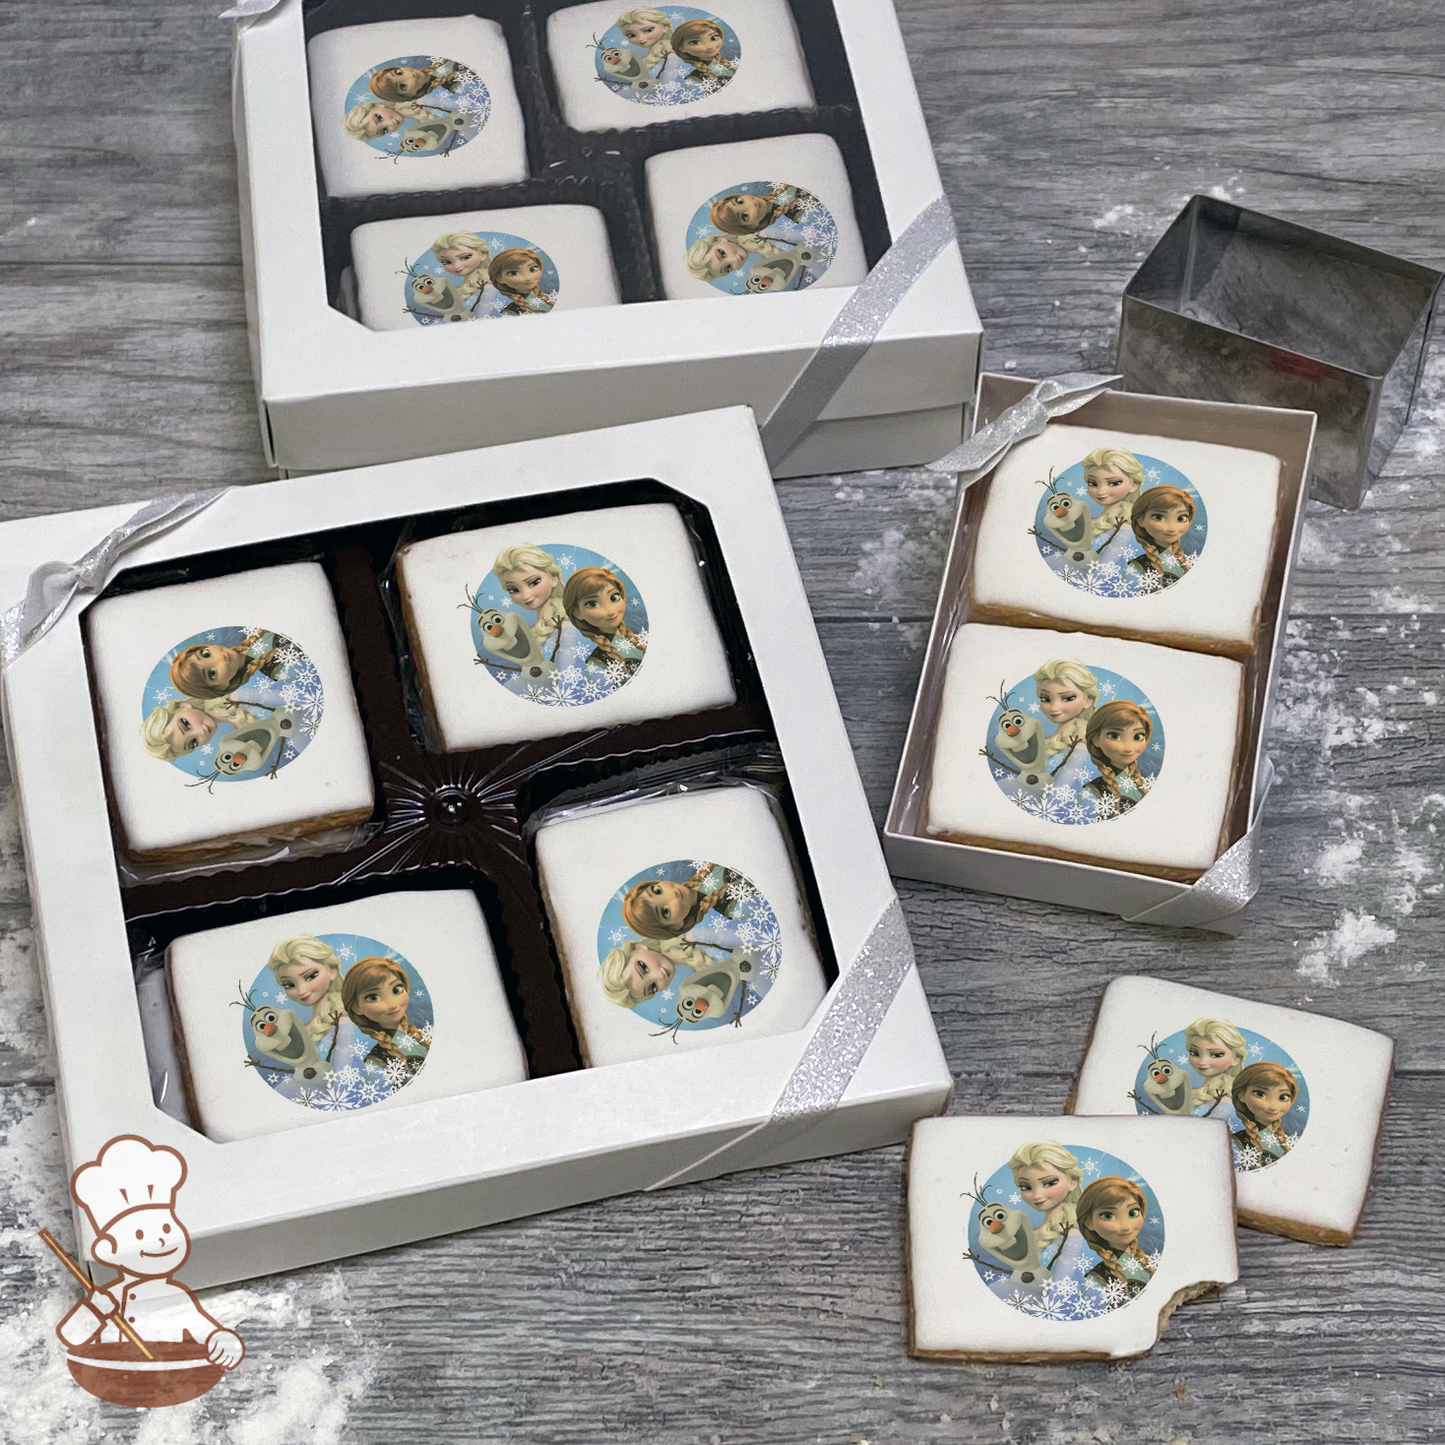 Frozen Olaf Elsa and Anna Cookie Gift Box (Rectangle)